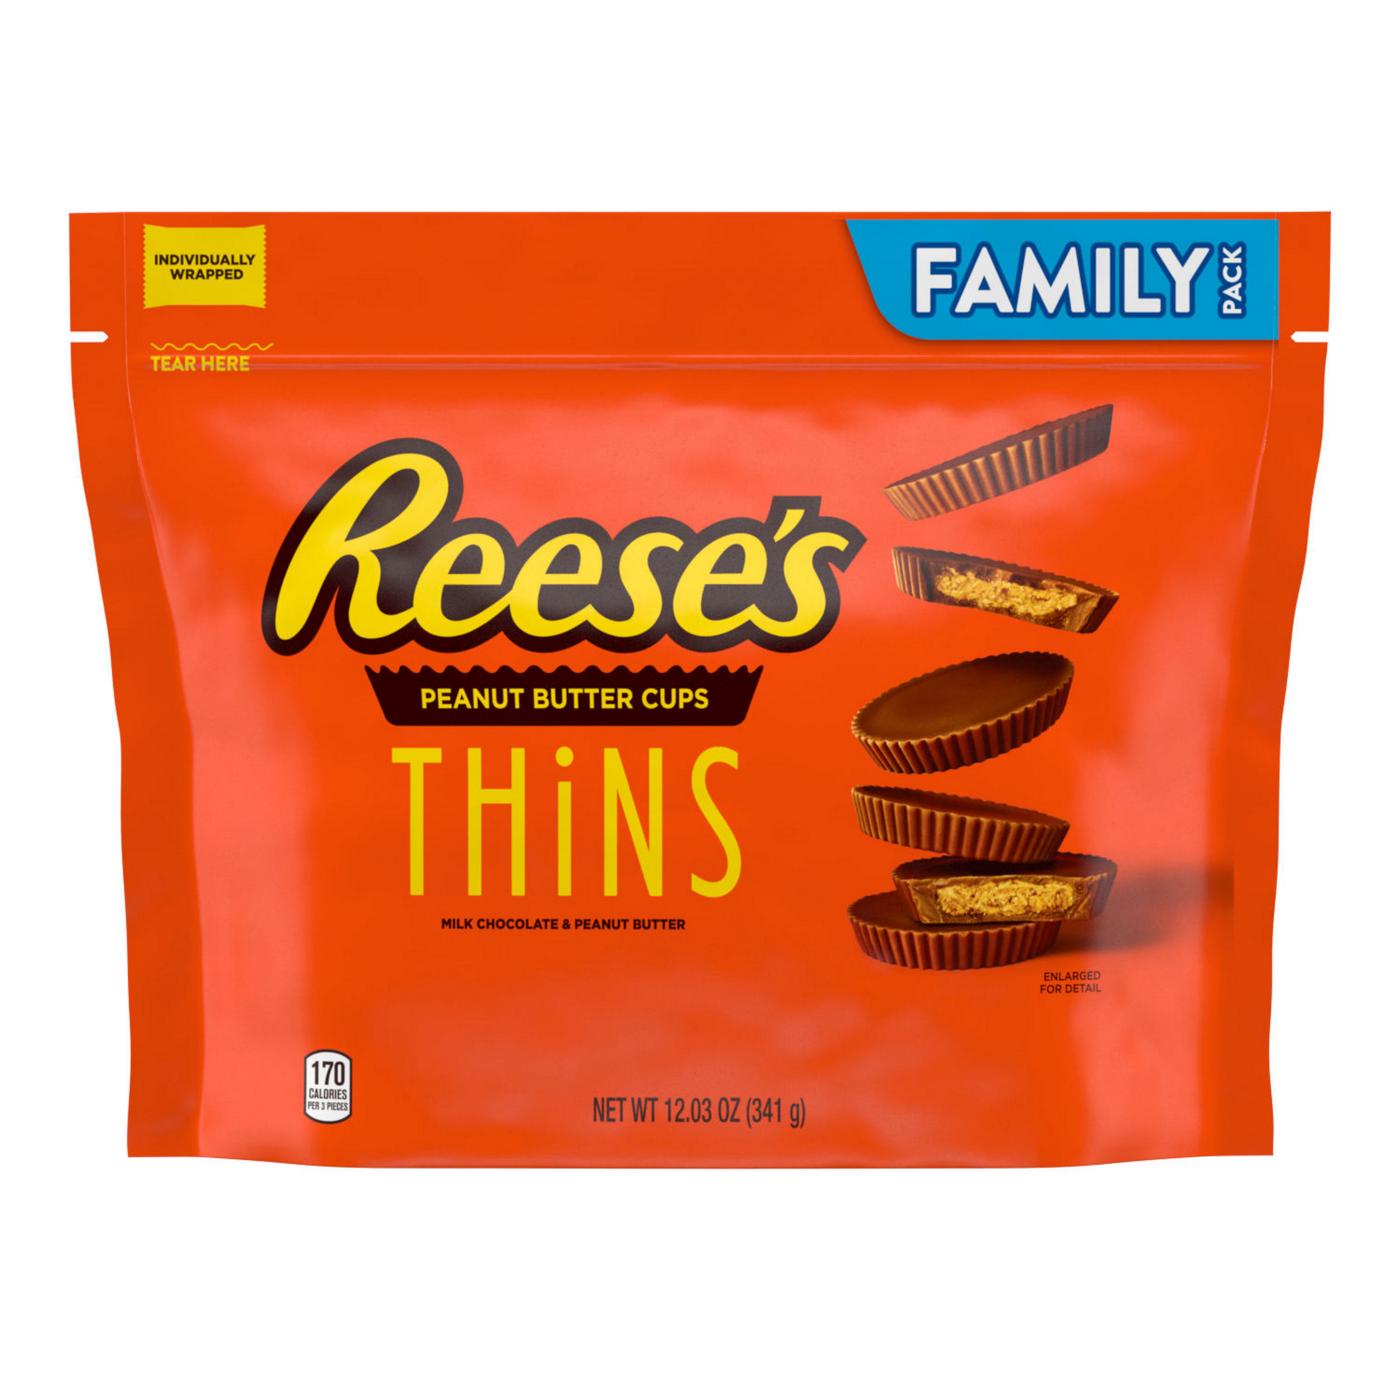 Reese's THiNS Peanut Butter Cups Candy - Family Pack; image 1 of 3